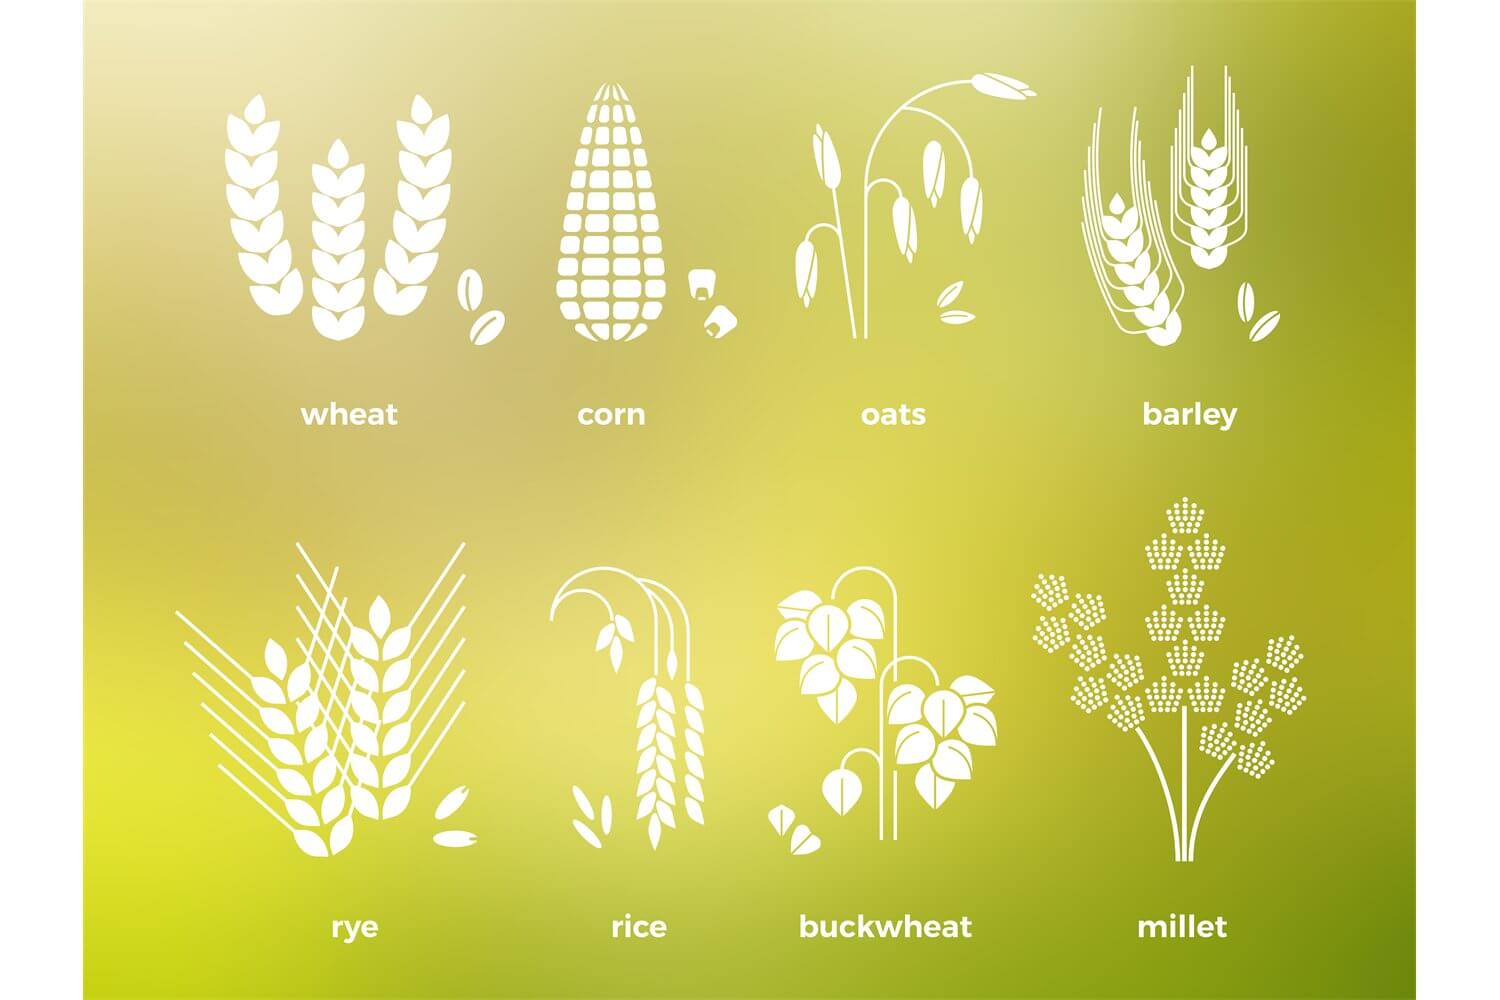 Cereal crops on a background from yellow to green.